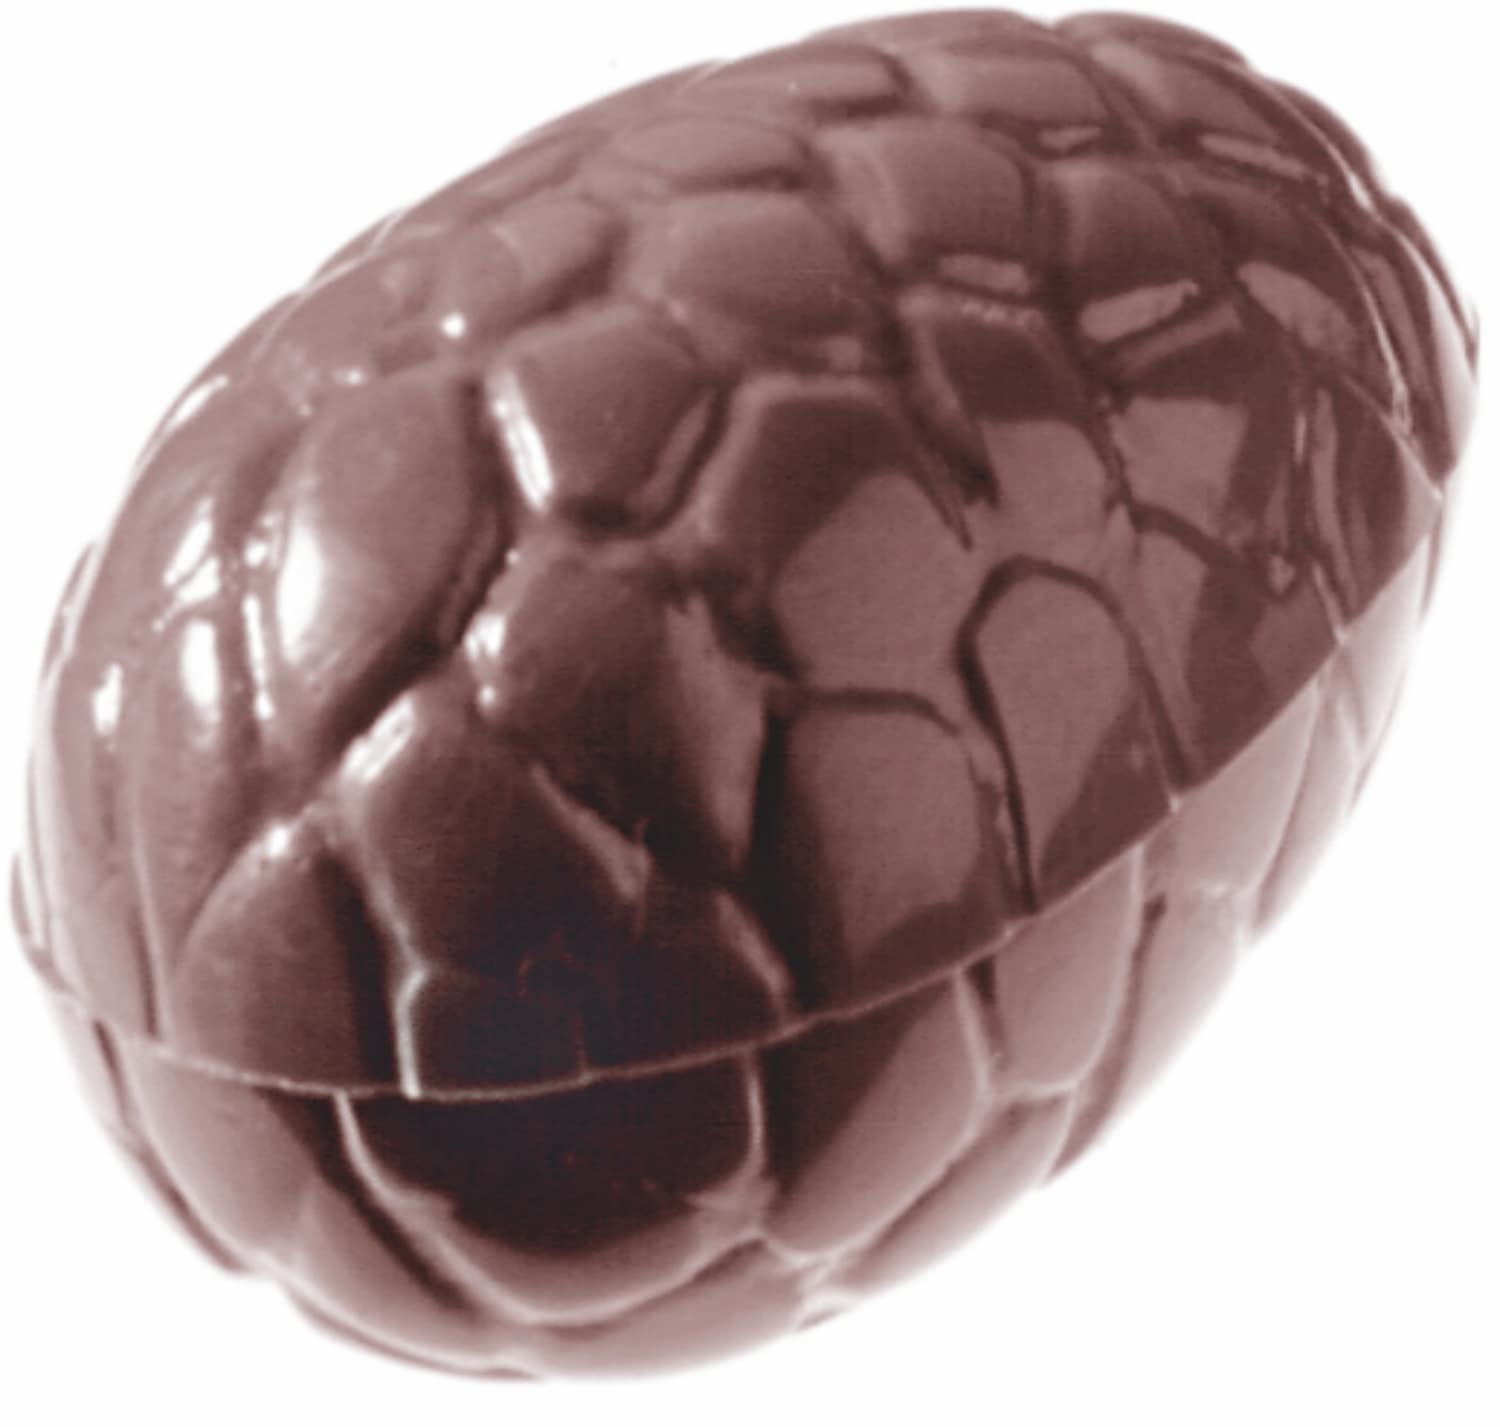 Chocolate mould "Easter egg" 421050